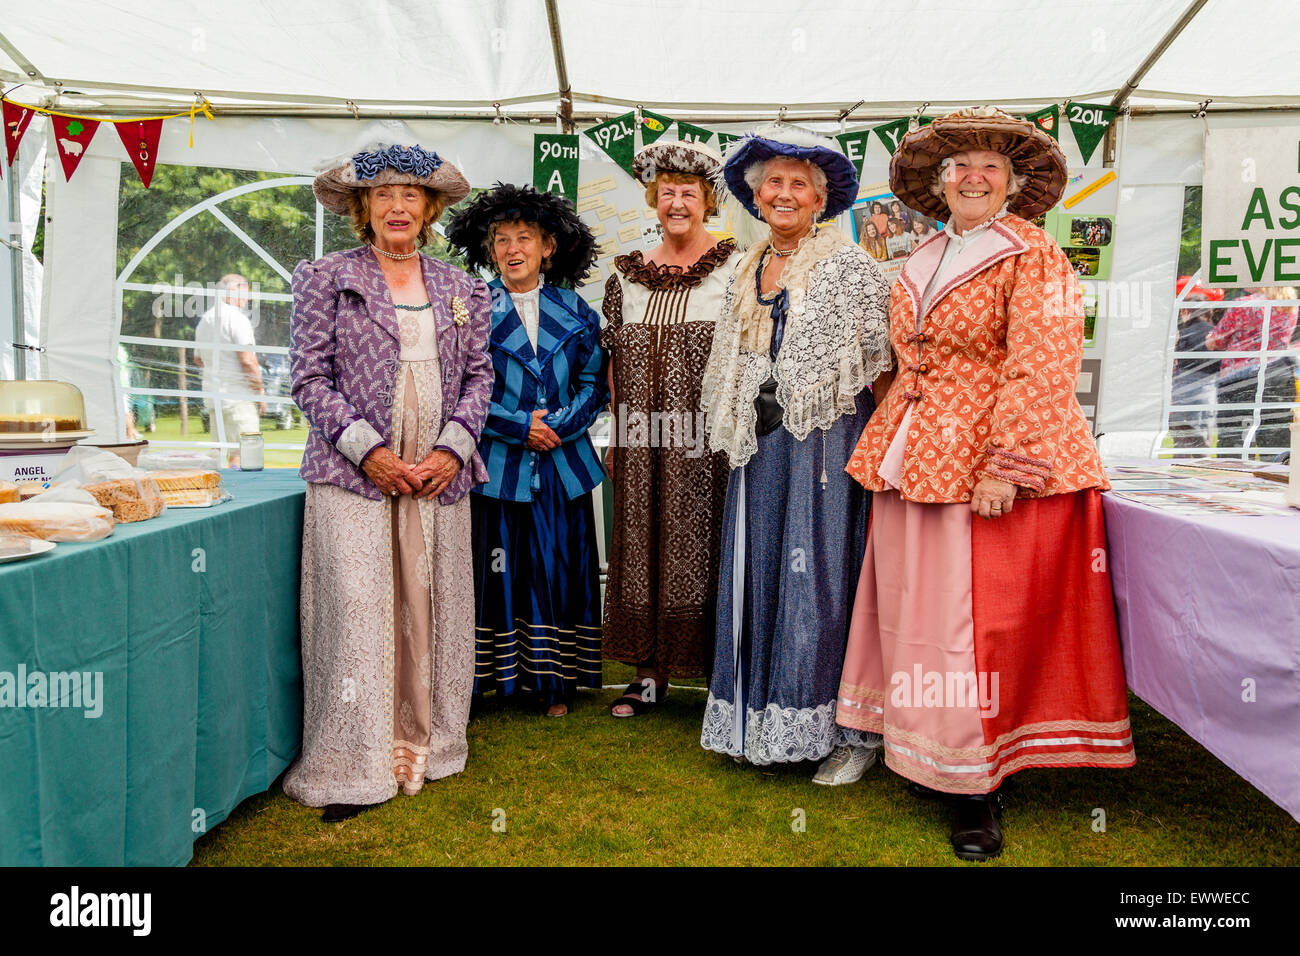 Members of The Women's Institute Dressed In Period Clothing, Nutley Village Fete, Nutley, Sussex, UK Stock Photo